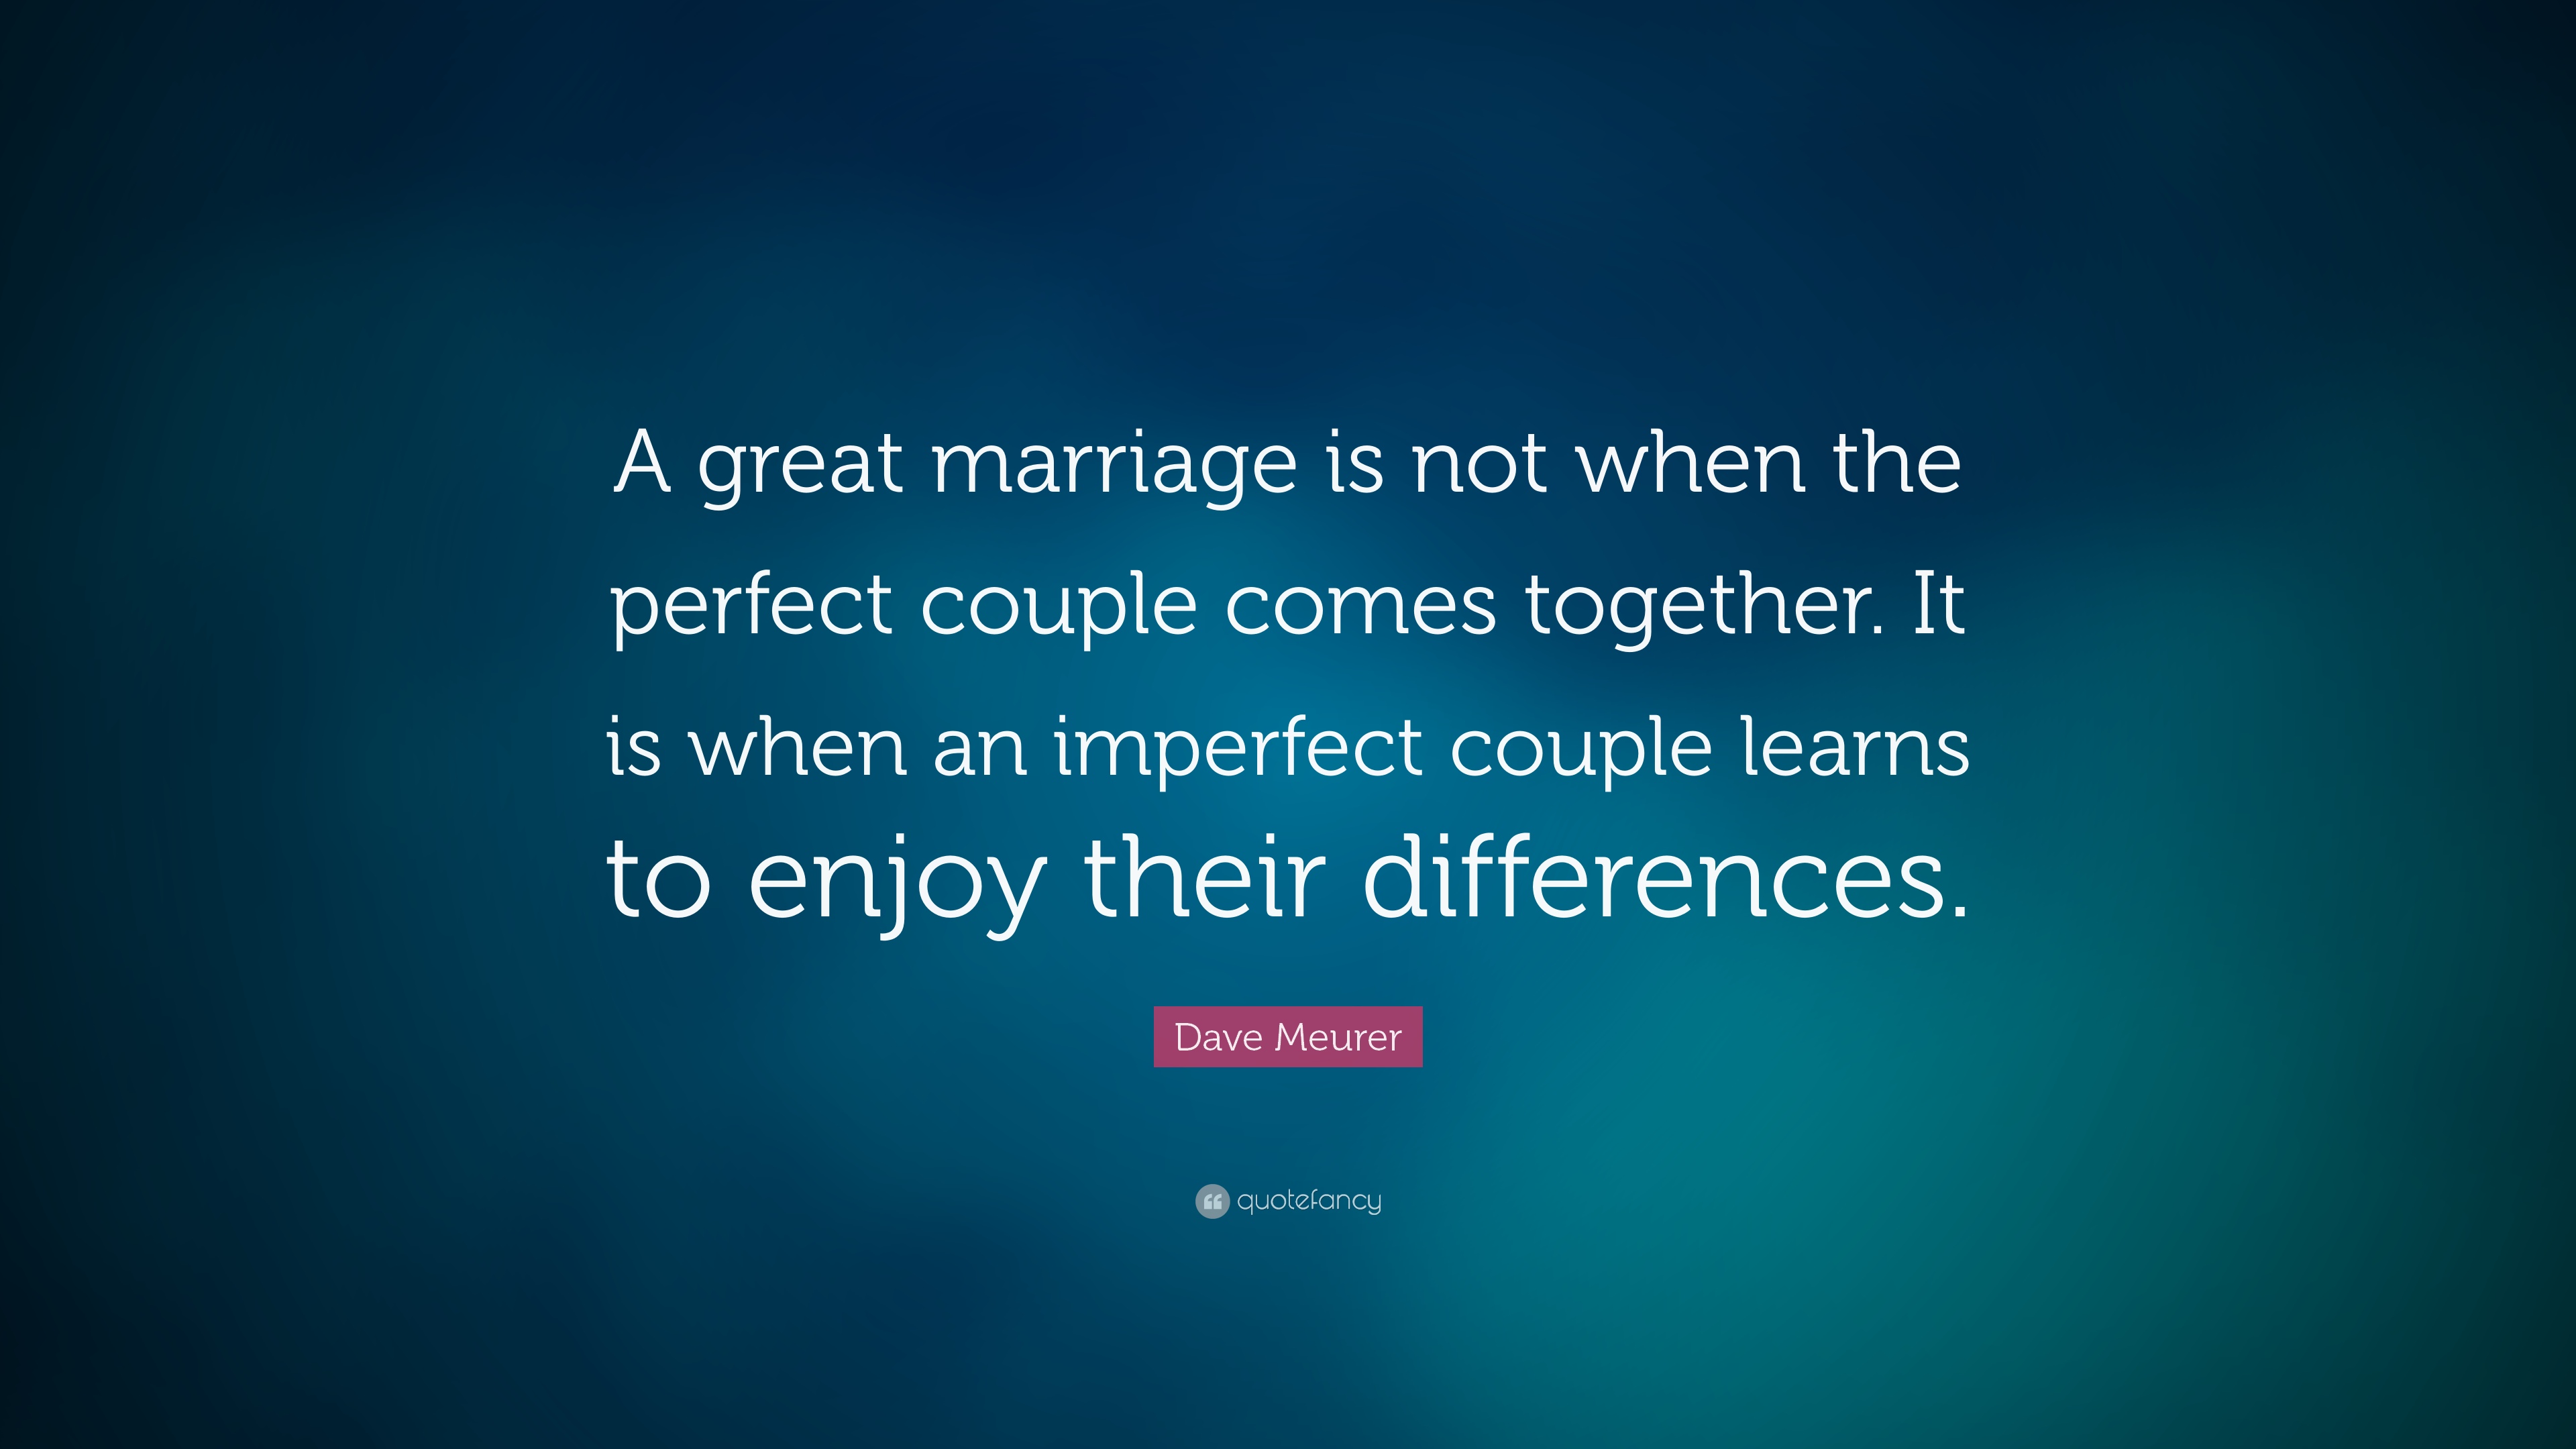 Dave Meurer Quote: “A great marriage is not when the perfect ...